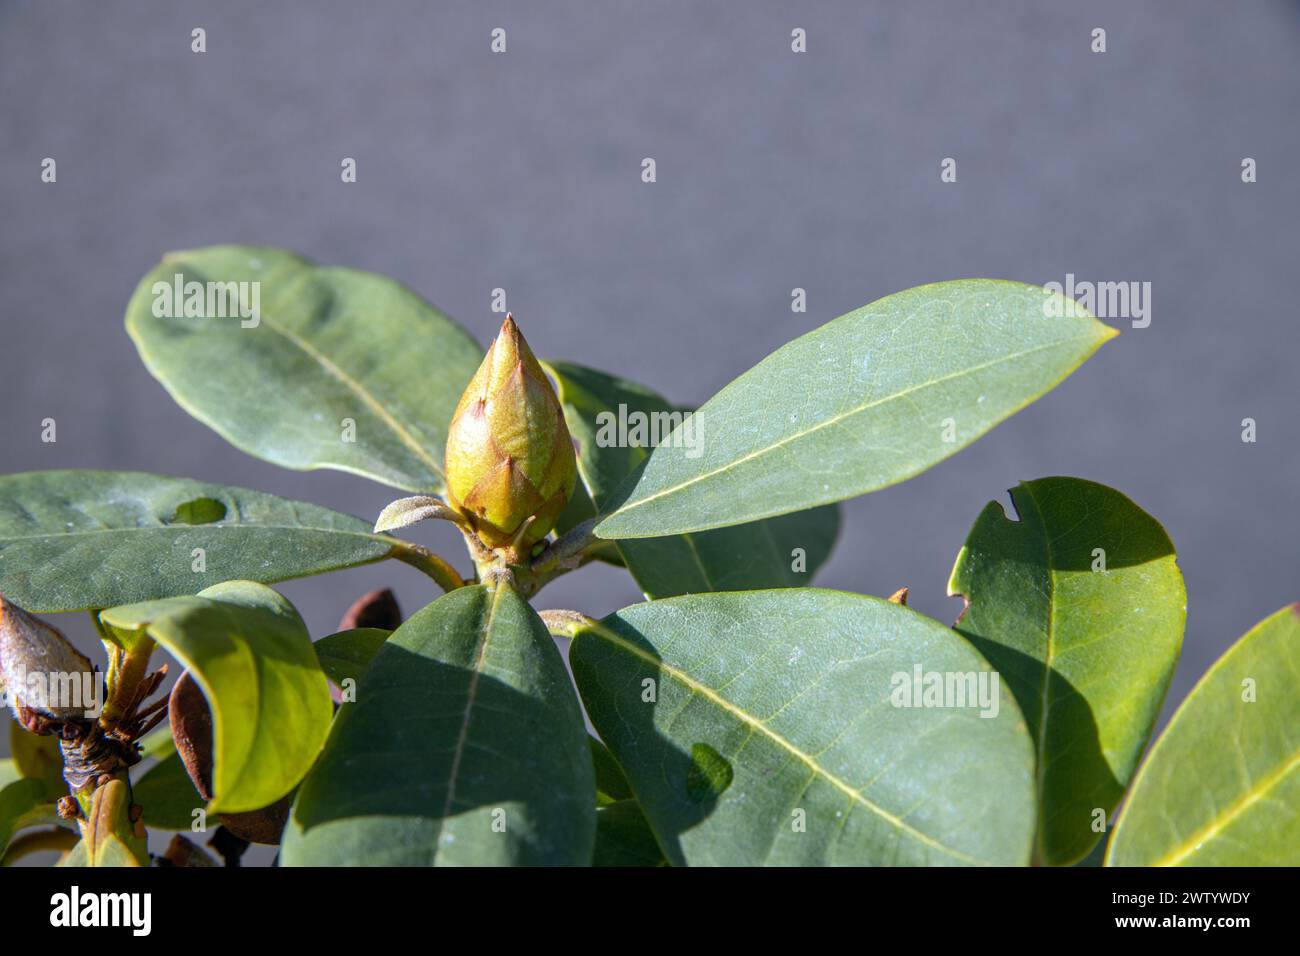 Rhododendron bud in leaf rosette Stock Photo